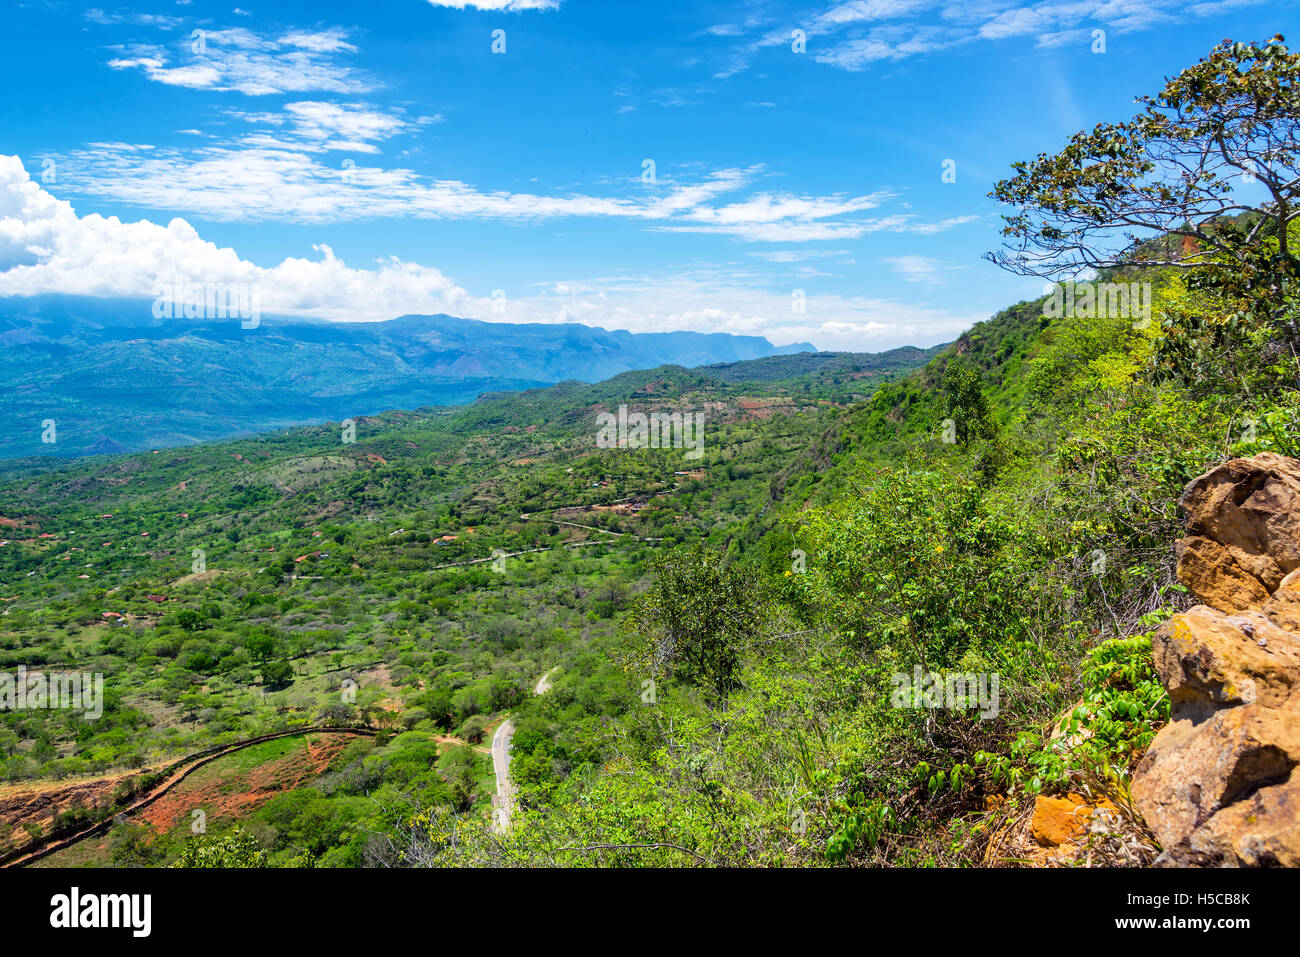 View of a beautiful rural landscape from Barichara, Colombia Stock Photo